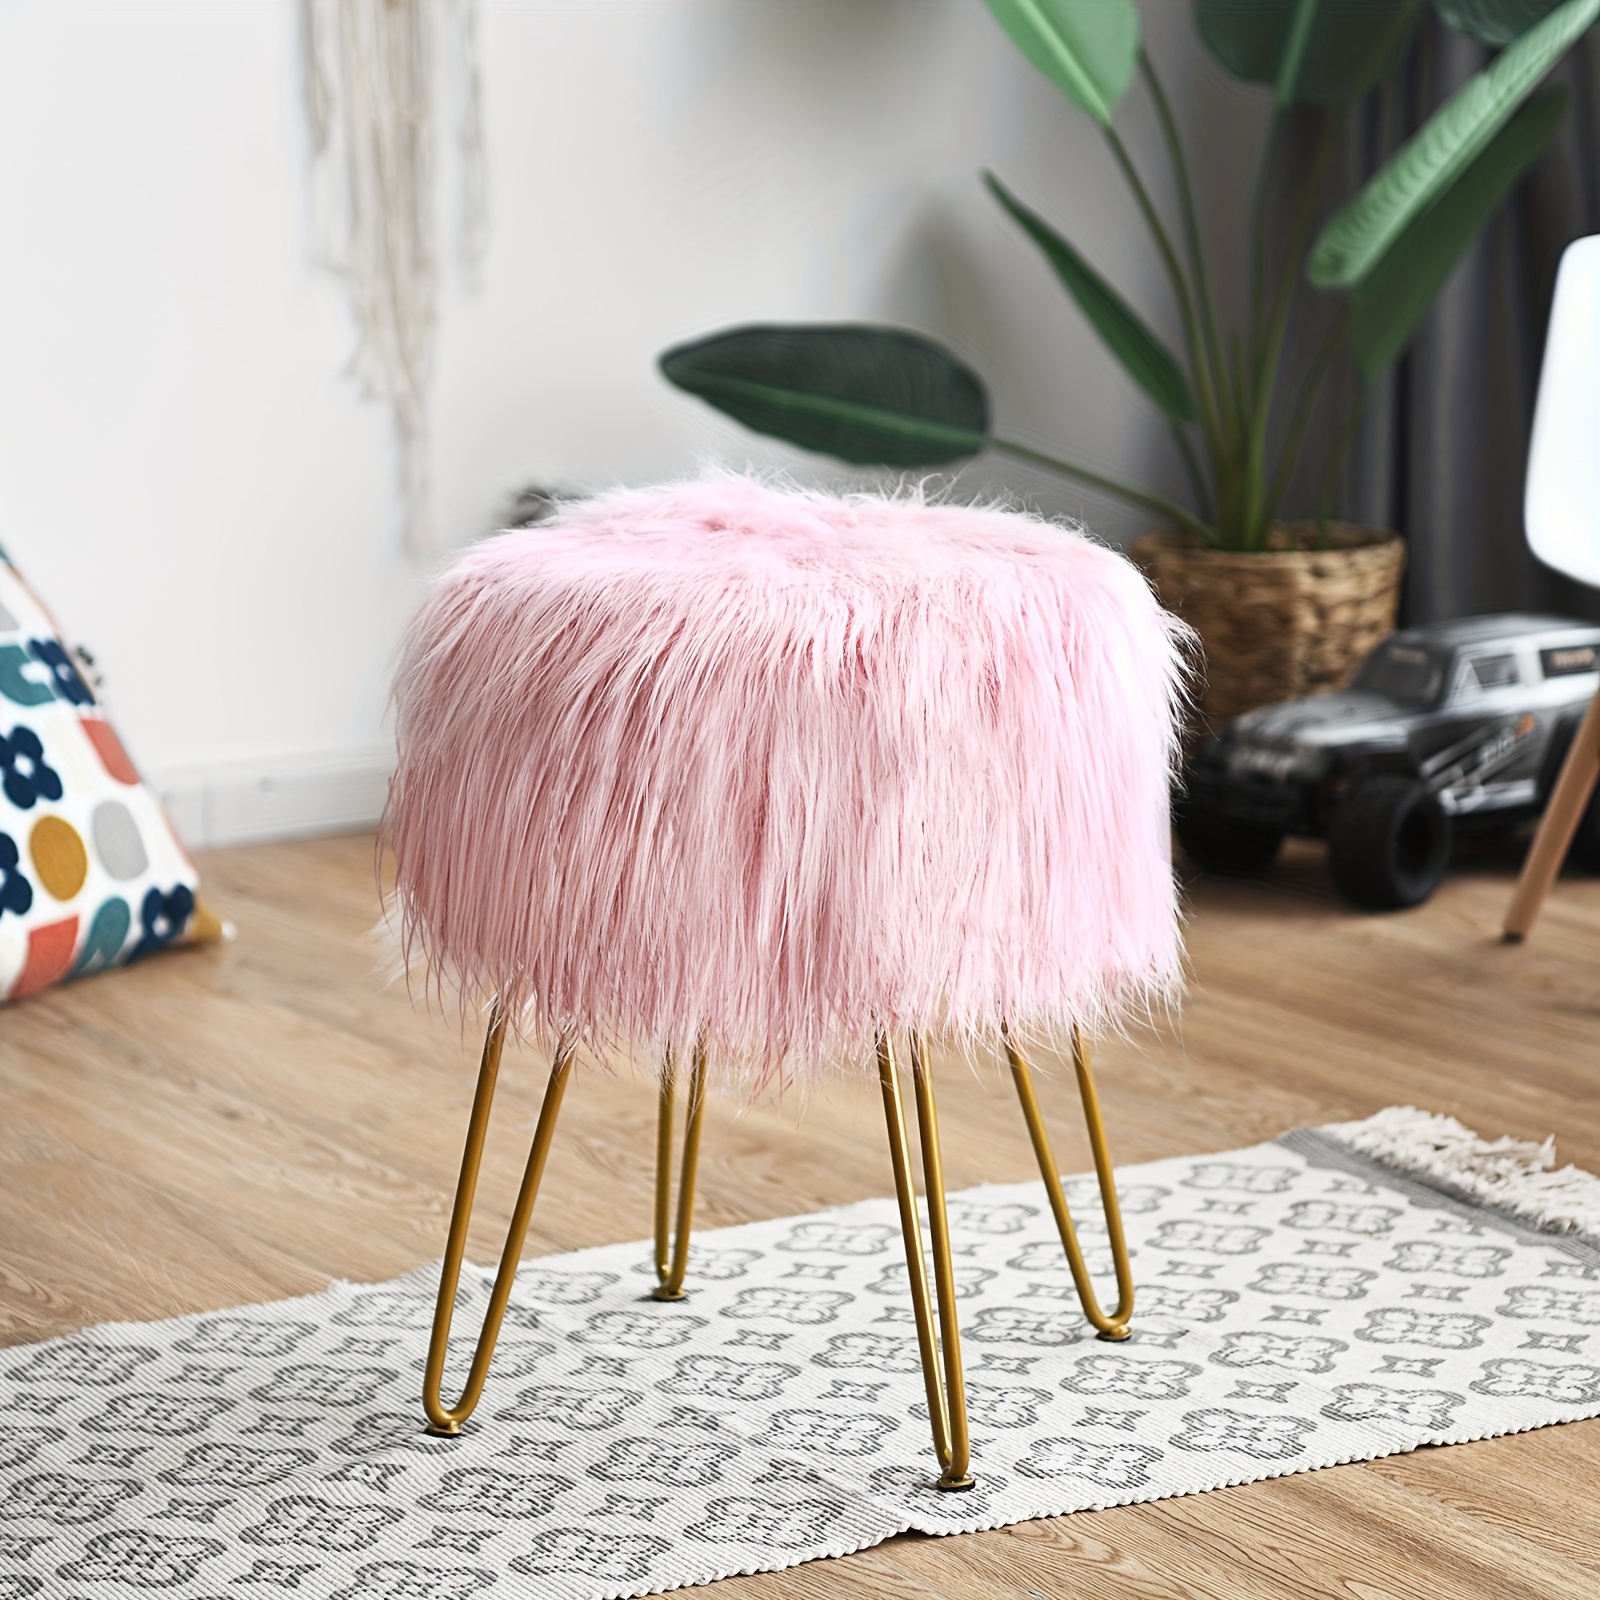 1pc Luxurious Faux Fur Vanity Chair - Wooden Round Ottoman With Padded Seat, Golden Finished Legs, Chic Makeup Stool For Bedroom Decor